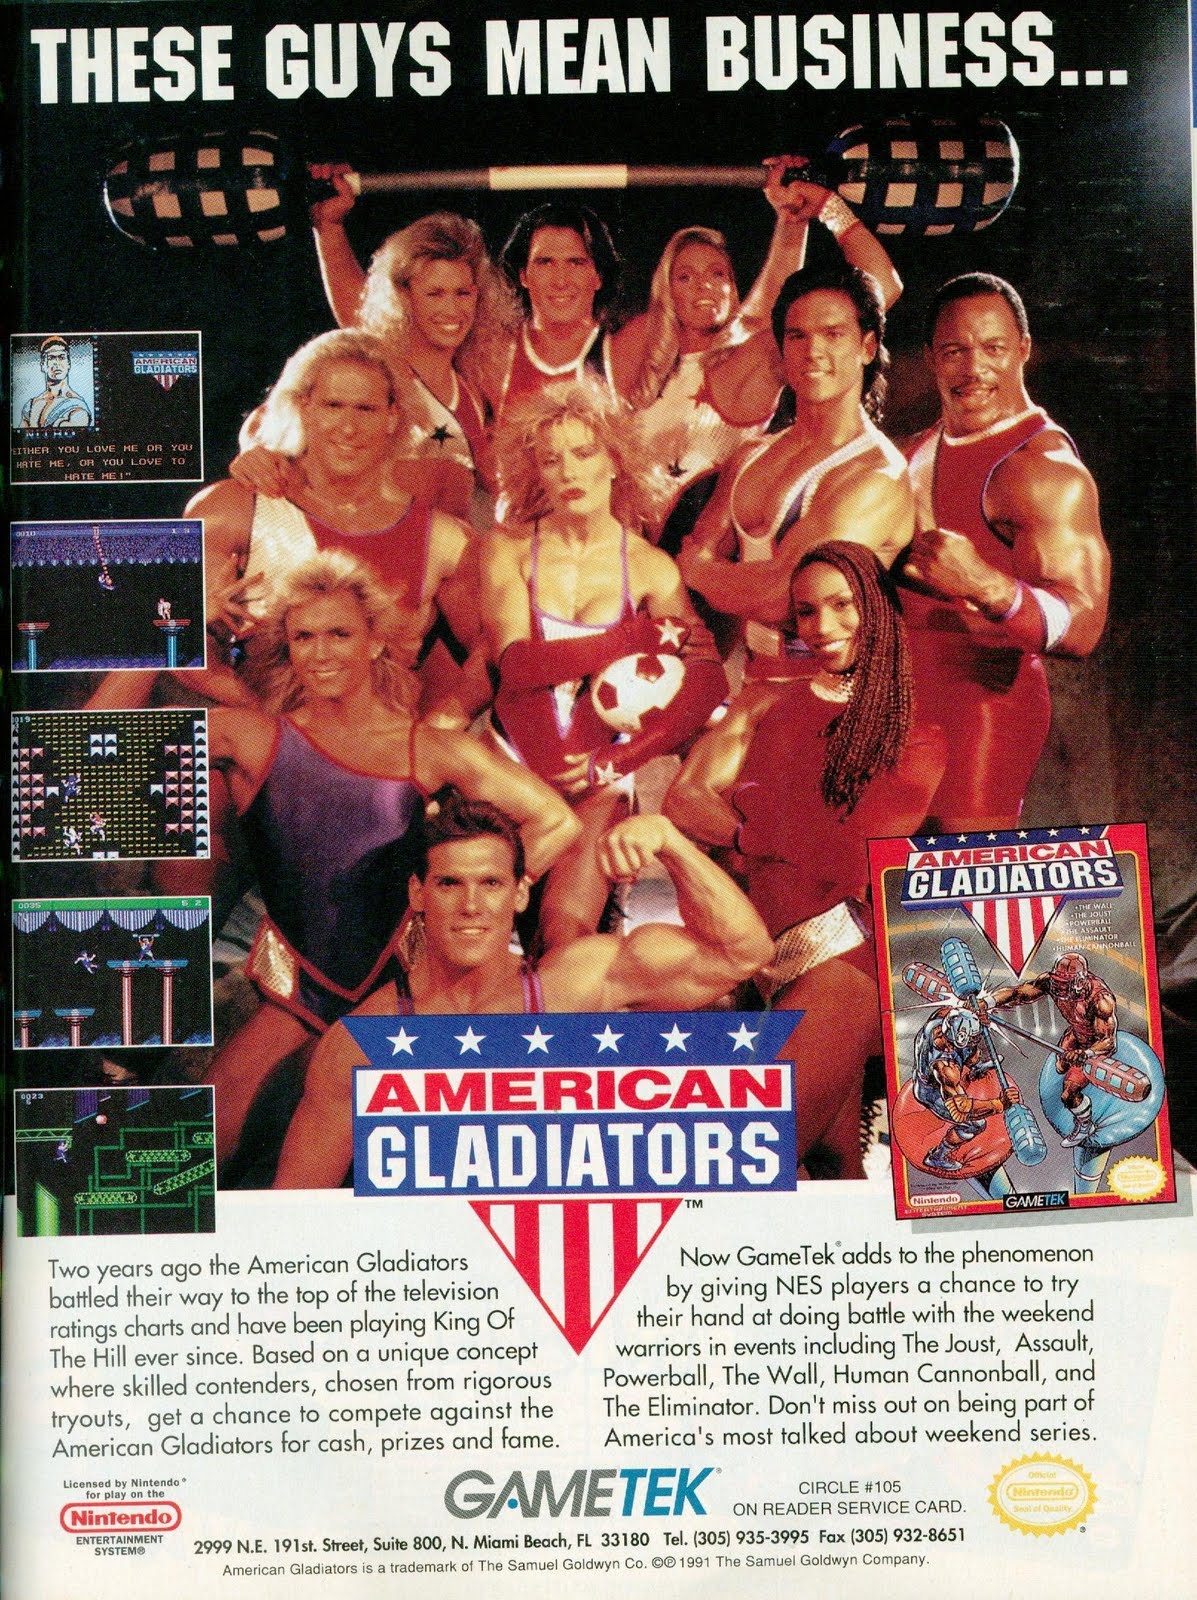 american gladiators gametek - These Guys Mean Business... Cladiators American Gladiators Two years ago the American Gladors bated their way to the top of the television rings charts and have been playing King of The Hill ever since Based on a que concept 